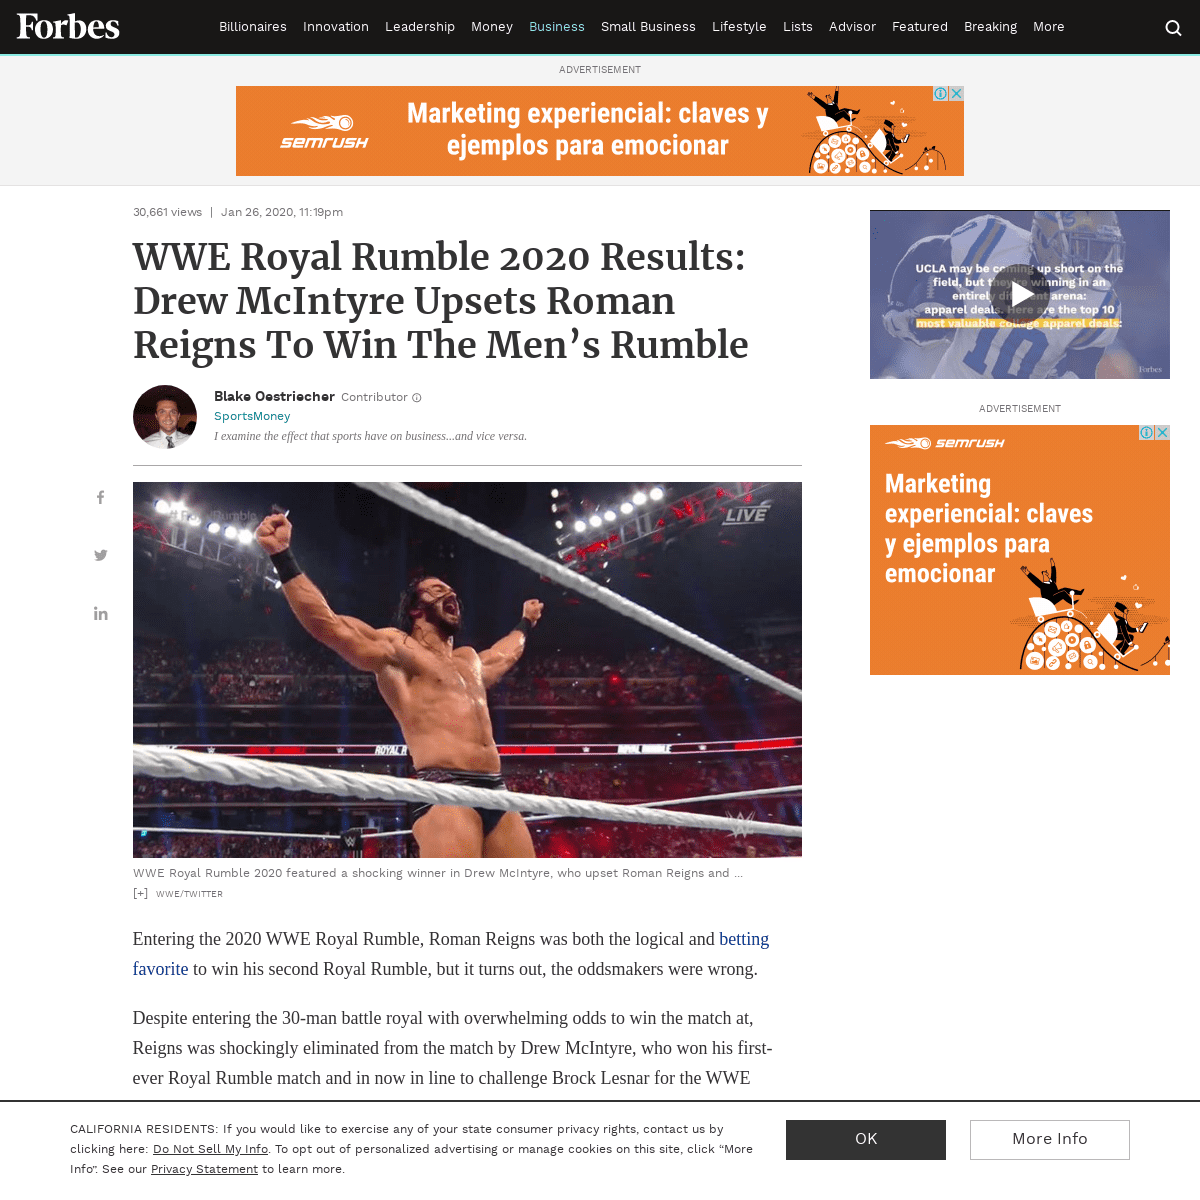 A complete backup of www.forbes.com/sites/blakeoestriecher/2020/01/26/wwe-royal-rumble-2020-results-drew-mcintyre-upsets-roman-r